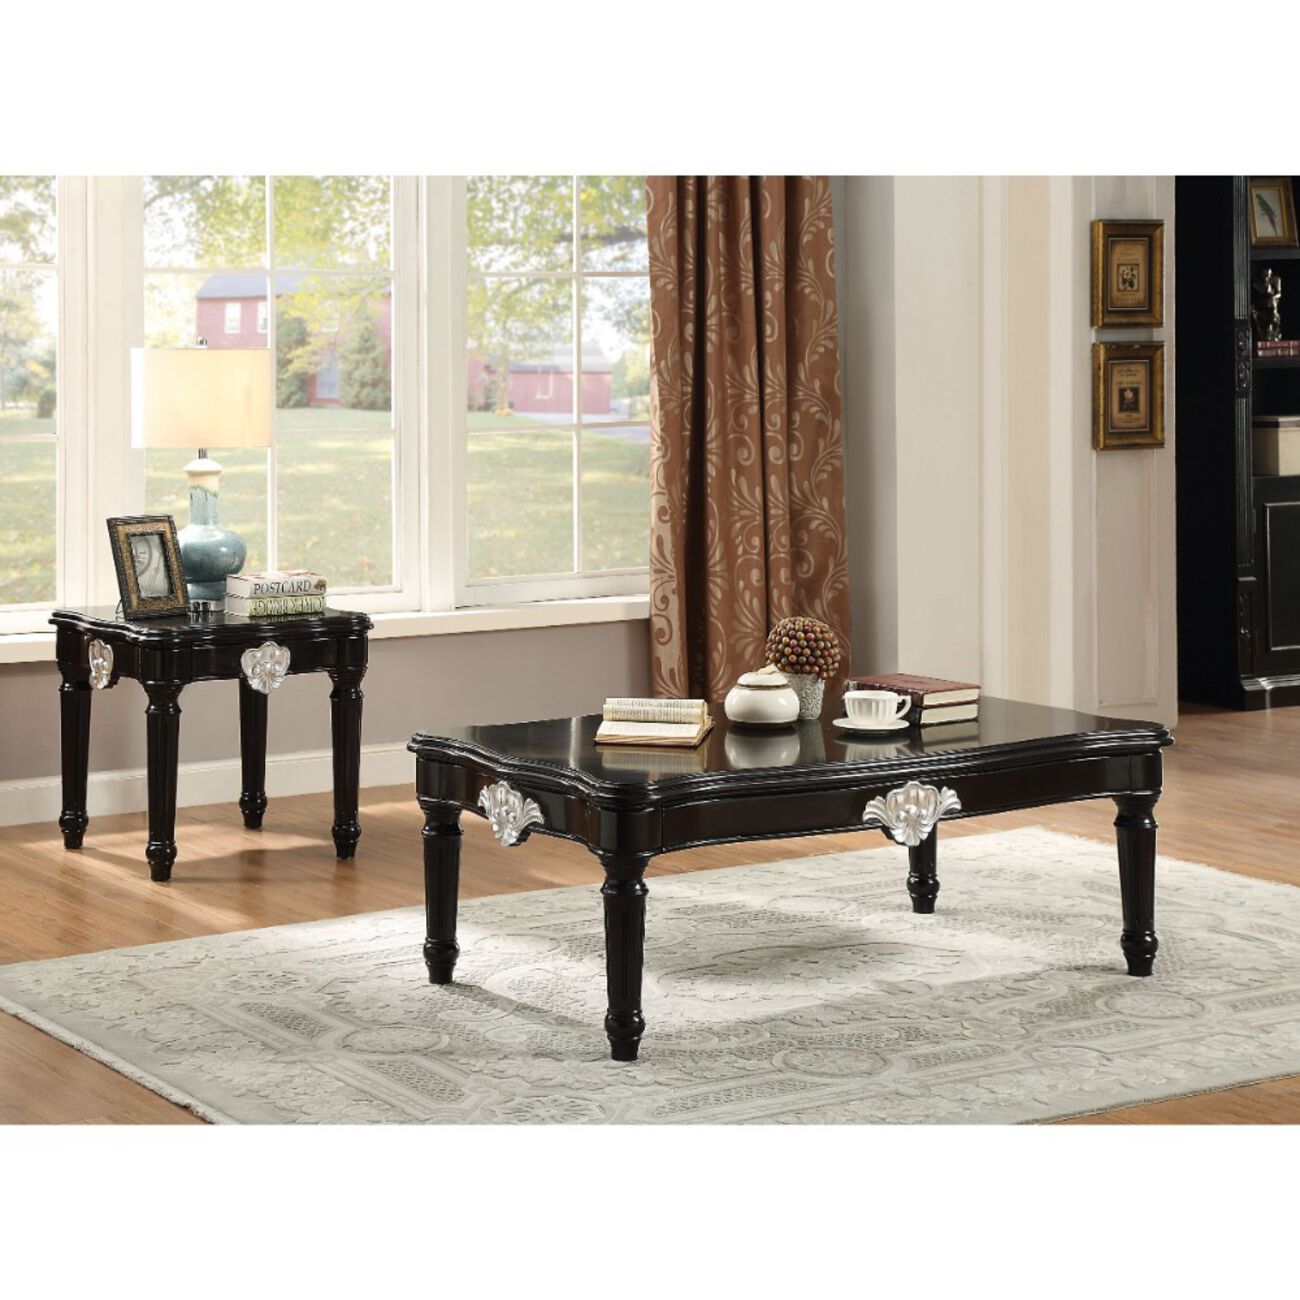 Traditional Rectangular Wooden Coffee Table with Scalloped Top, Black 